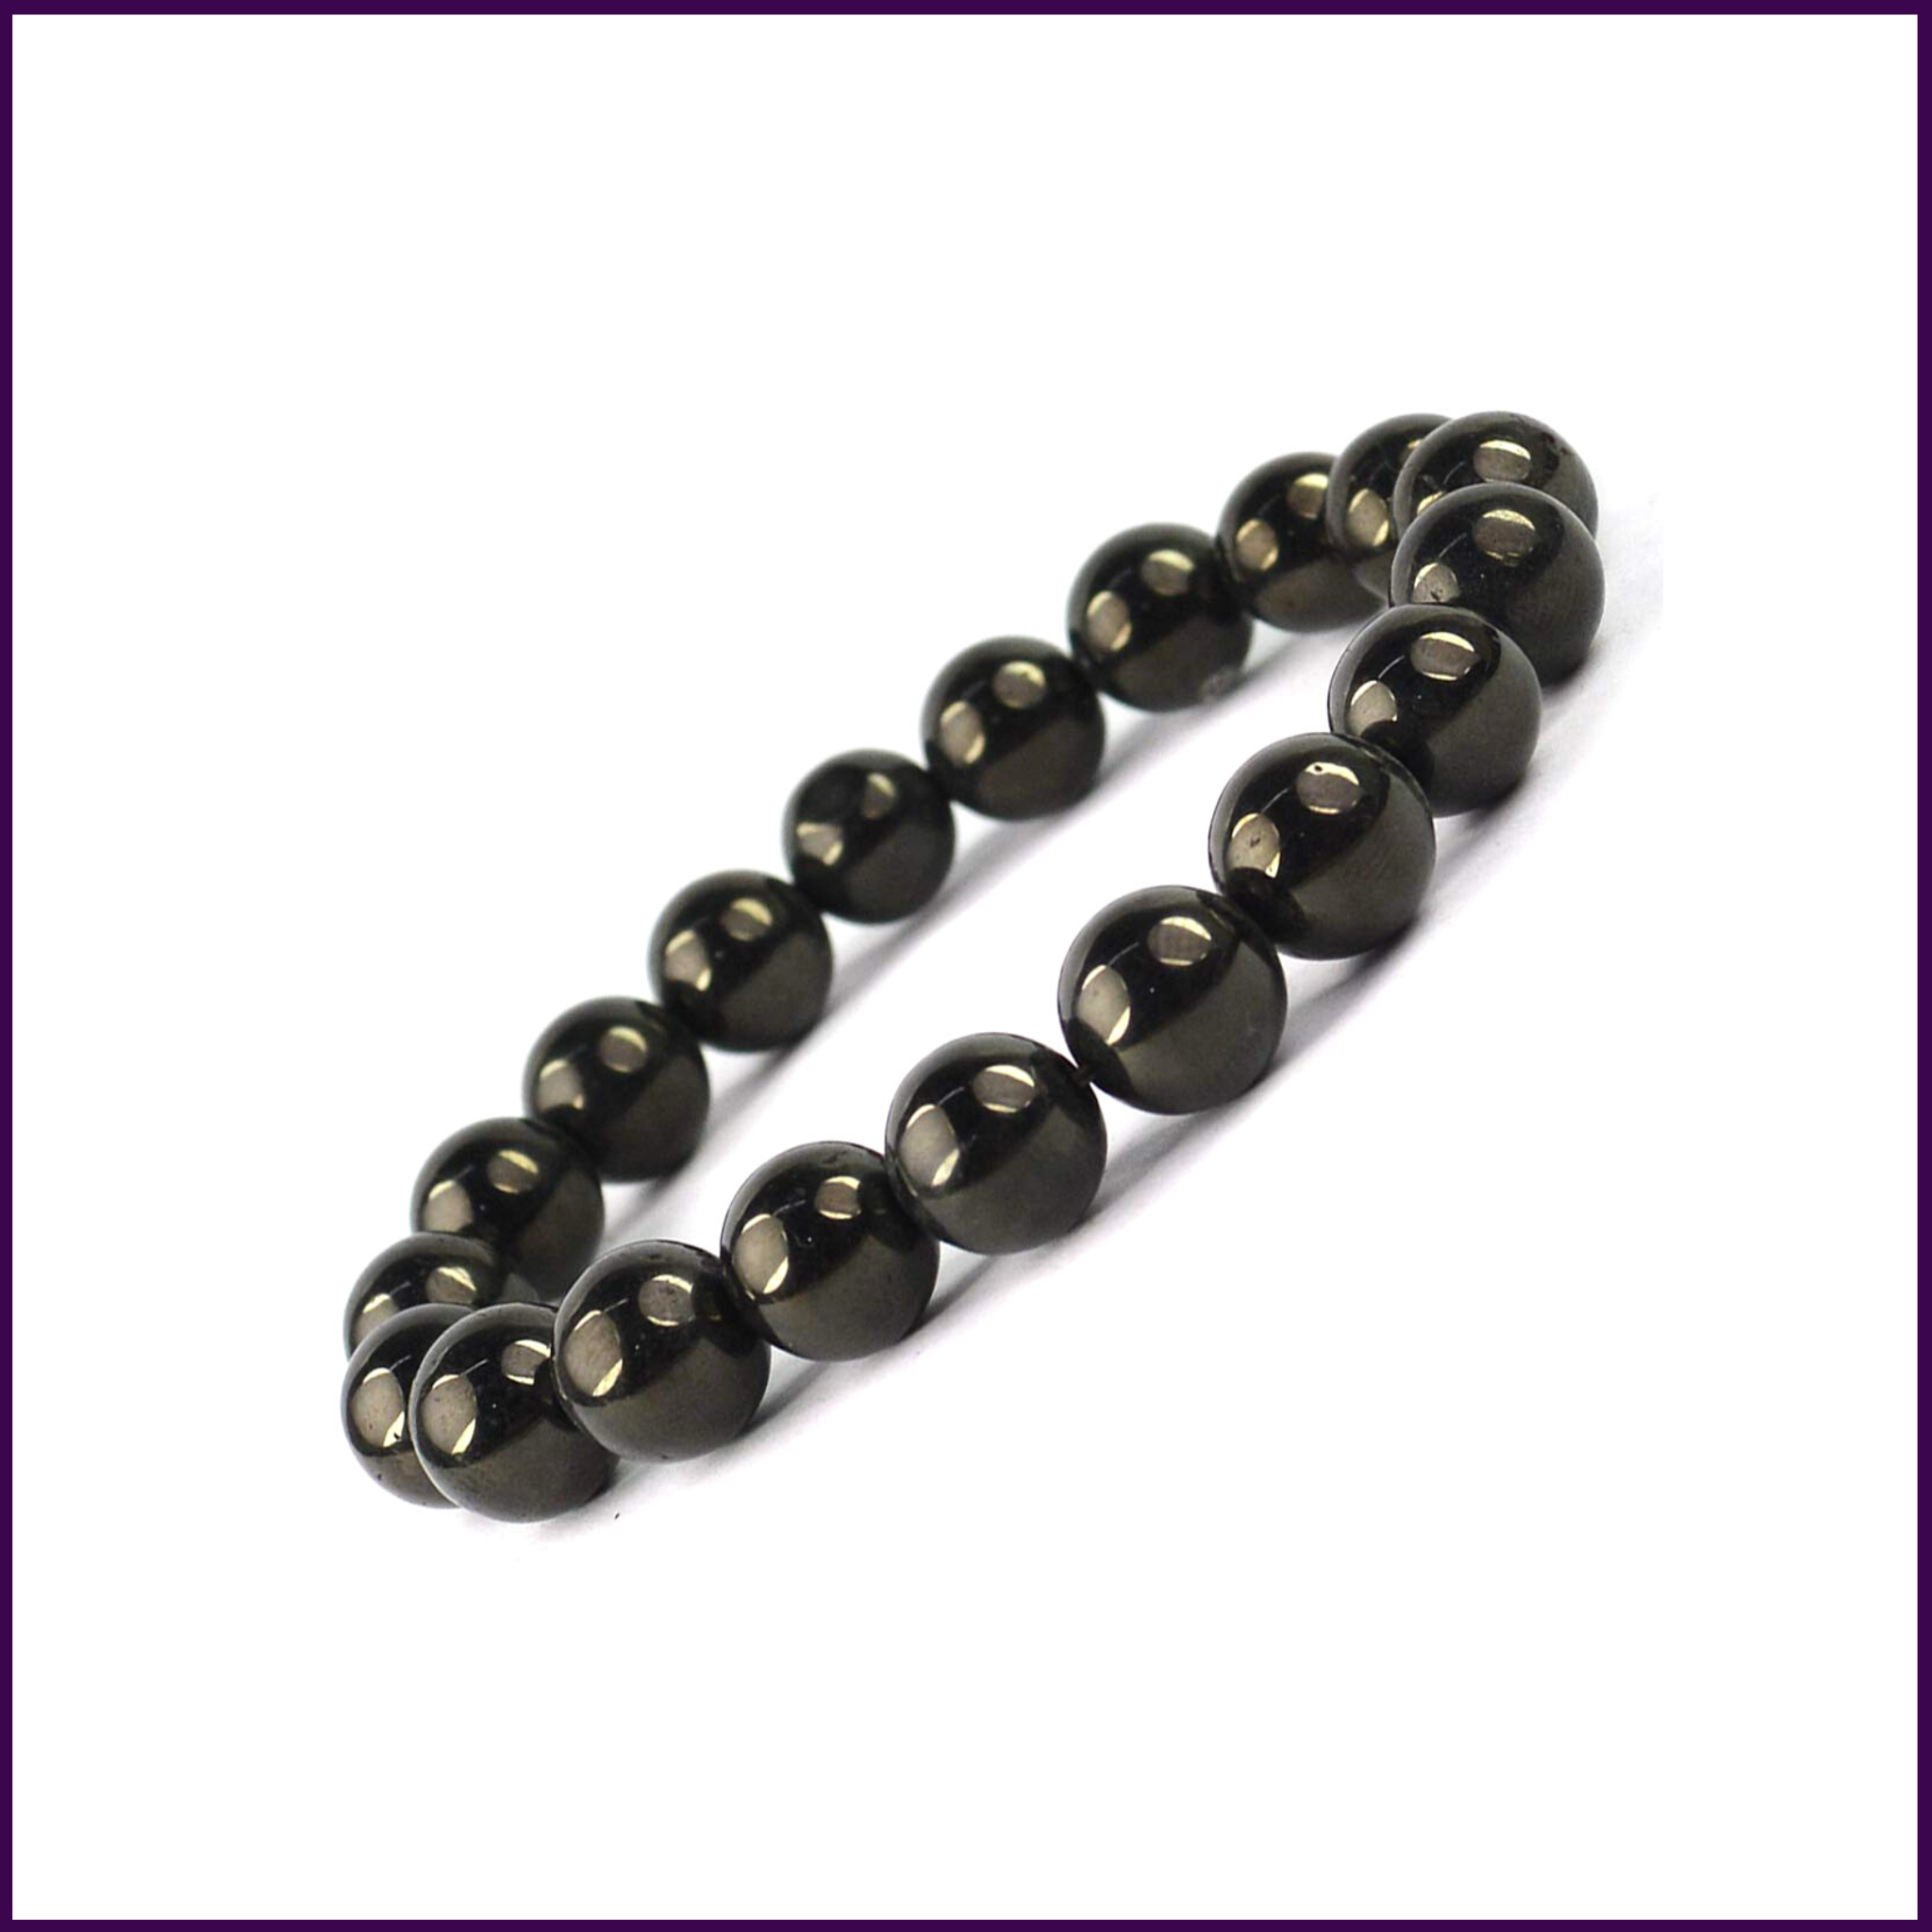 Natural Black Agate Crystal Bracelet For Students To Increase Focus, Courage & Success - 51pyramids